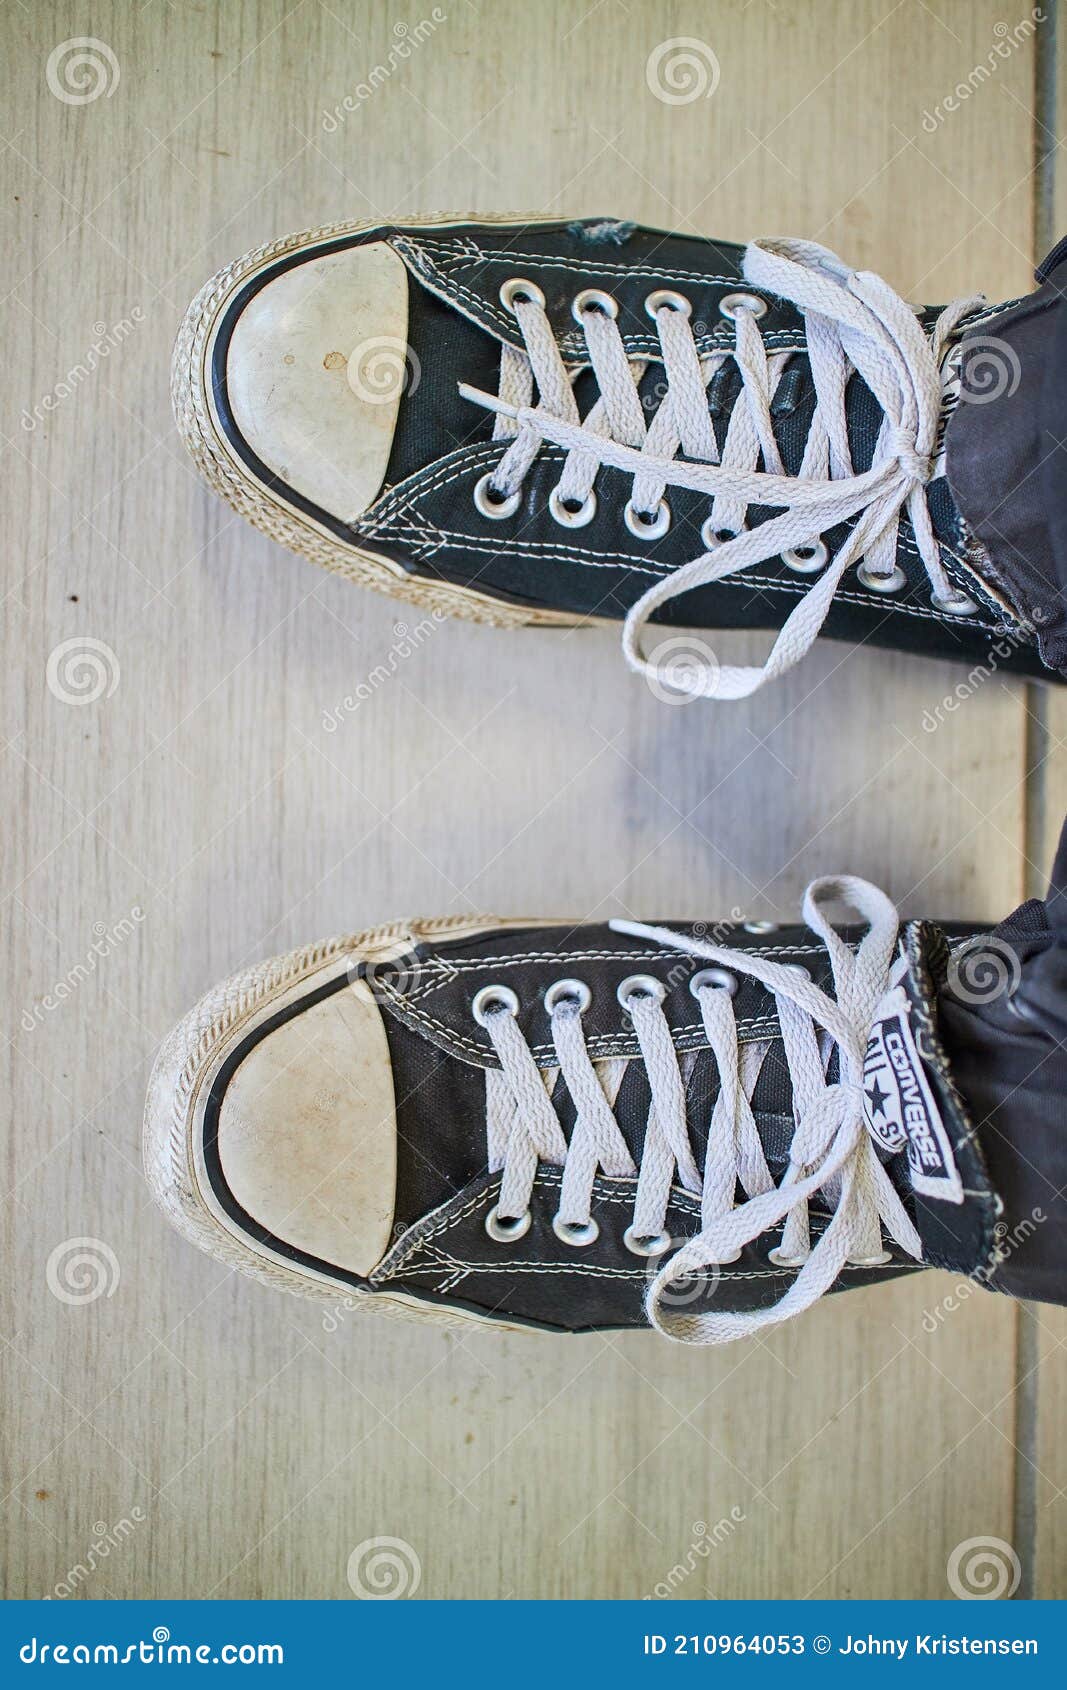 Wearing Black Dirty Converse Shoes Stock Image - Image of shop,